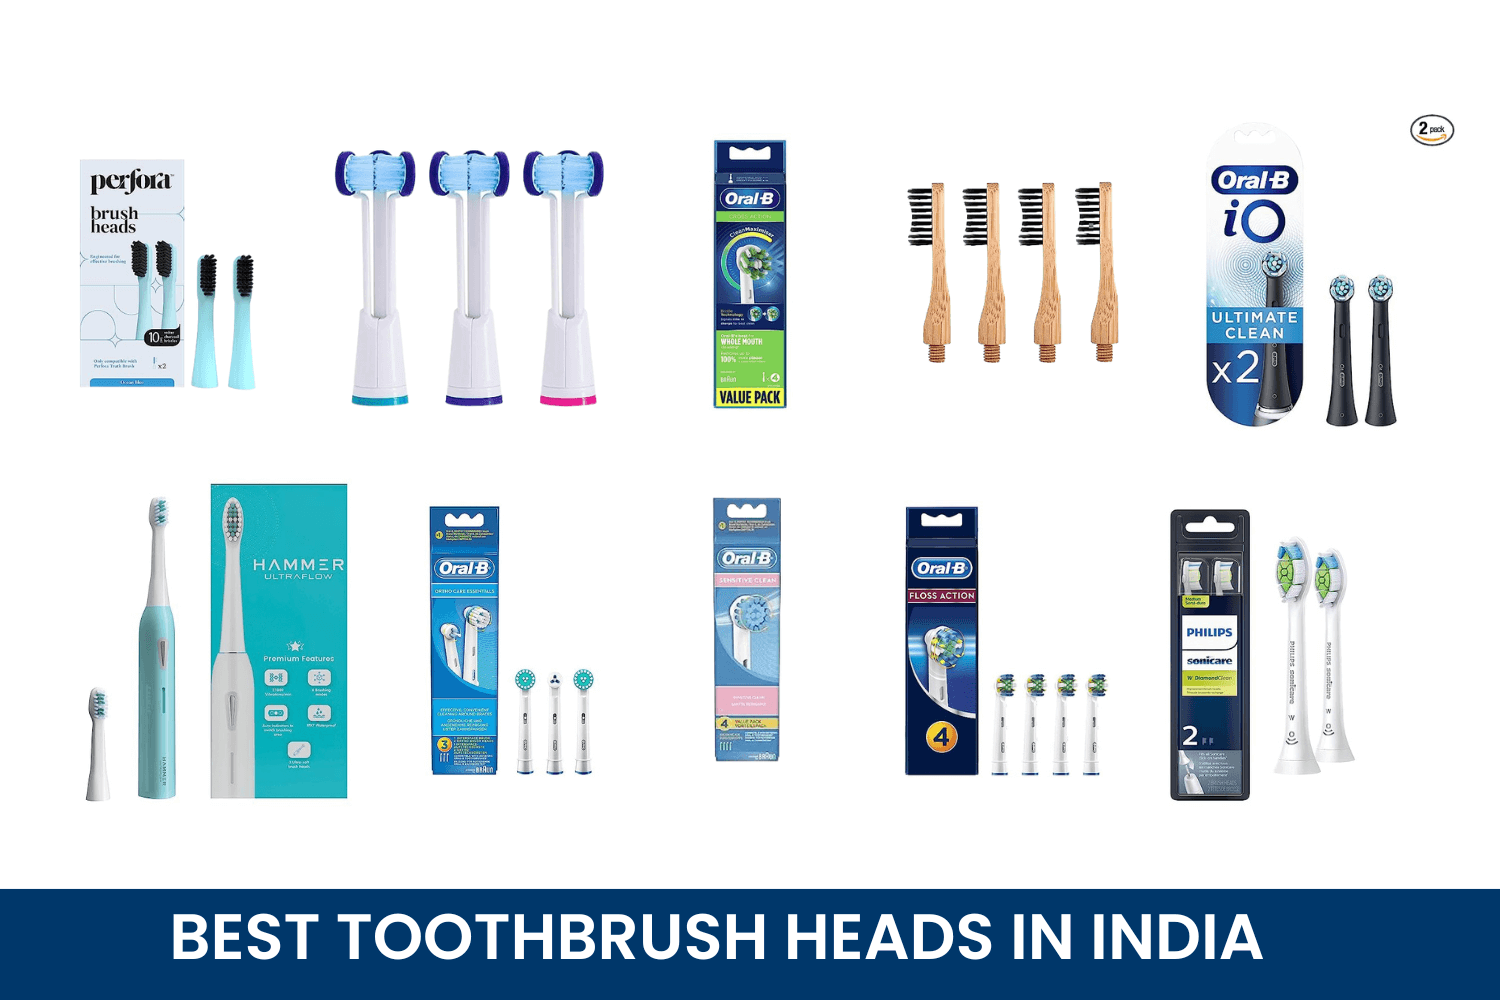 Top 10 Toothbrushes heads in India